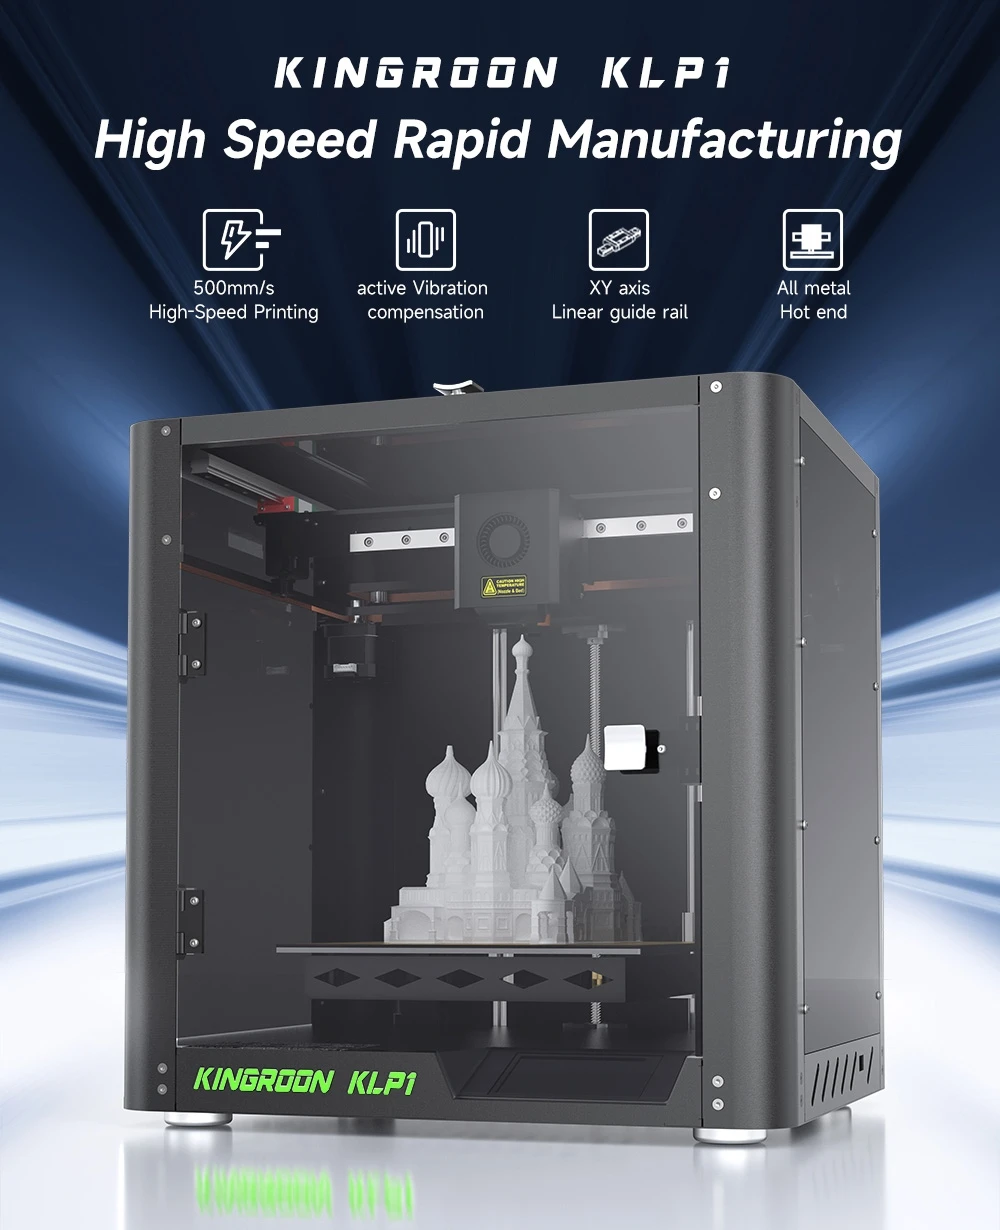 KINGROON KLP1 3D Printer, Auto Leveling, 0.05-0.3mm Printing Accuracy, 500mm/s Printing Speed, Klipper Firmware, Material Break Detection, 5:1 Gear Ratio, 210x210x210mm